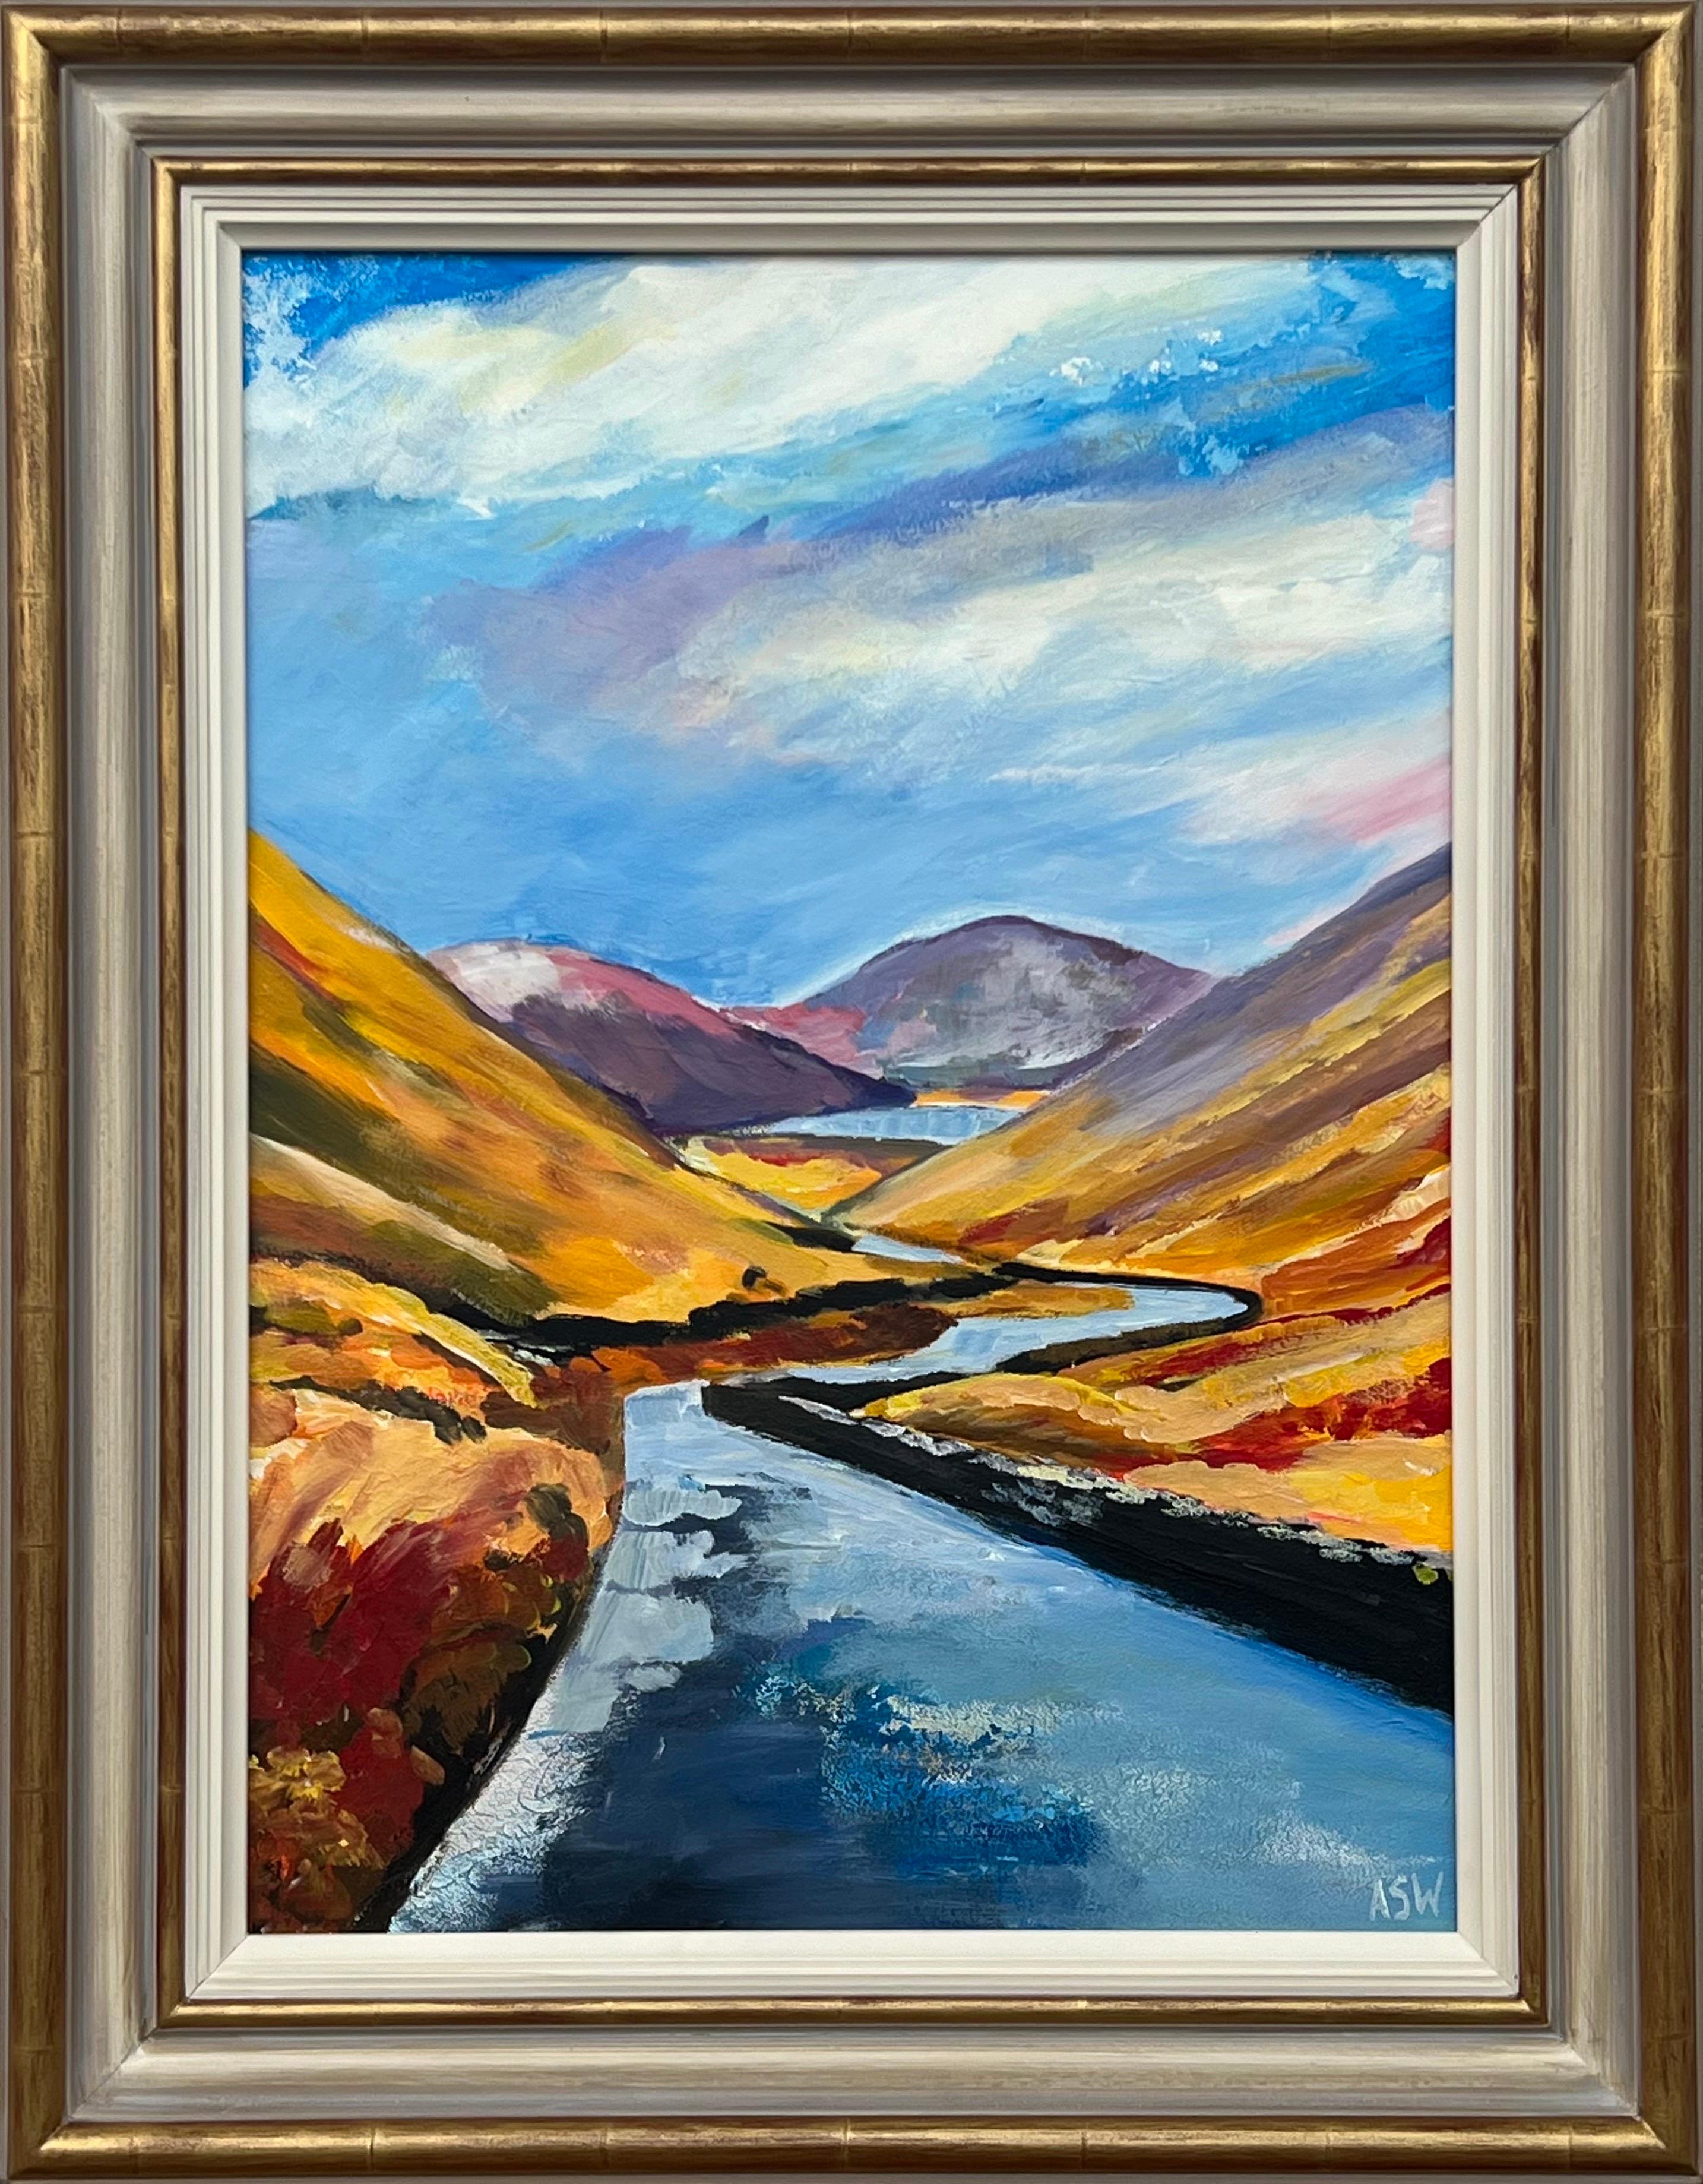 Abstract Painting Angela Wakefield - A Memory of Kirkstone Pass Mountain Landscape dans le Lake District of England